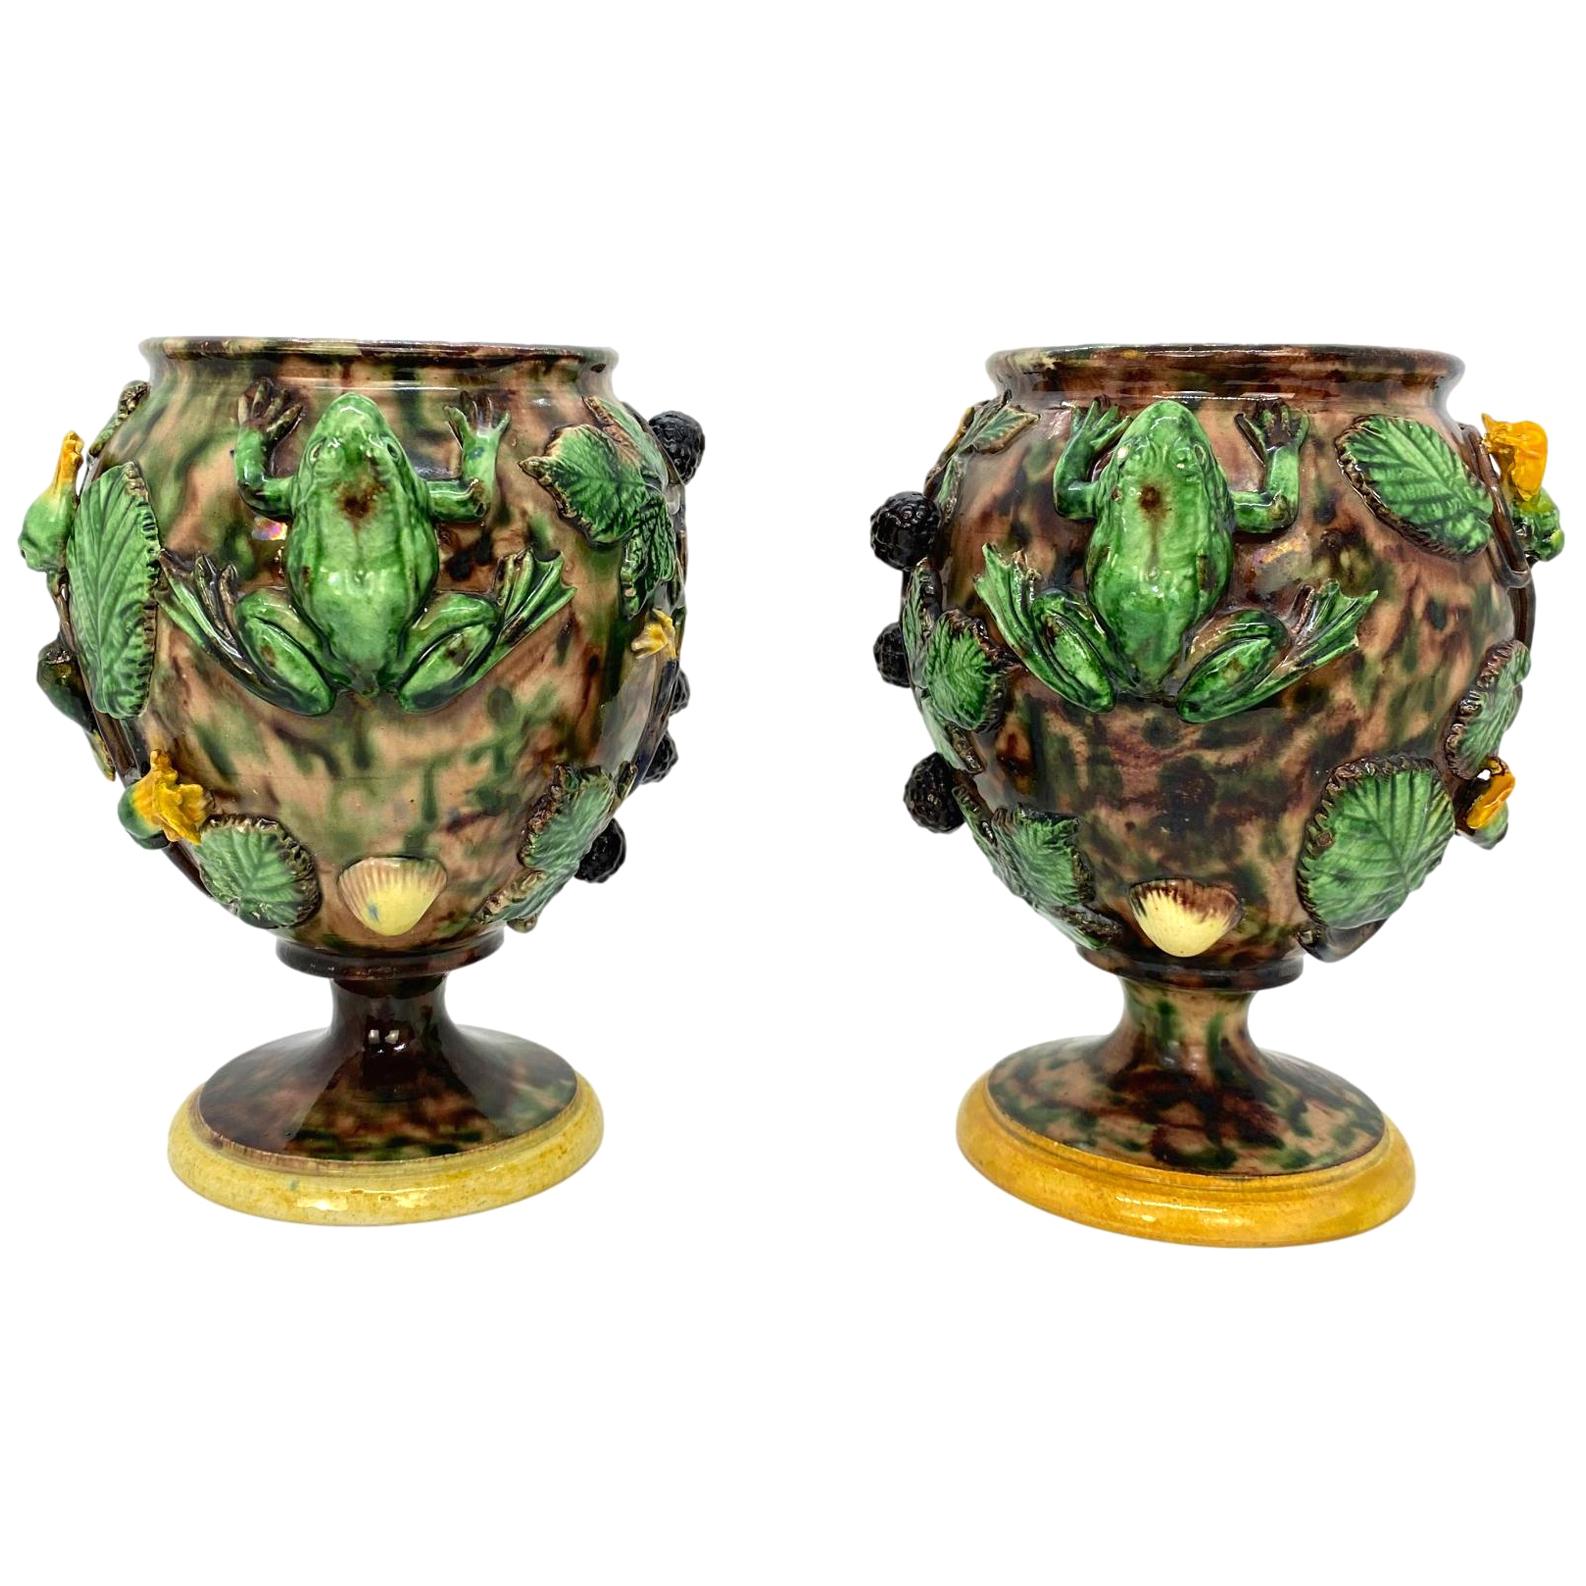 Pair of Majolica Palissy Ware Vases with Frogs, Thomas Sergent French circa 1885